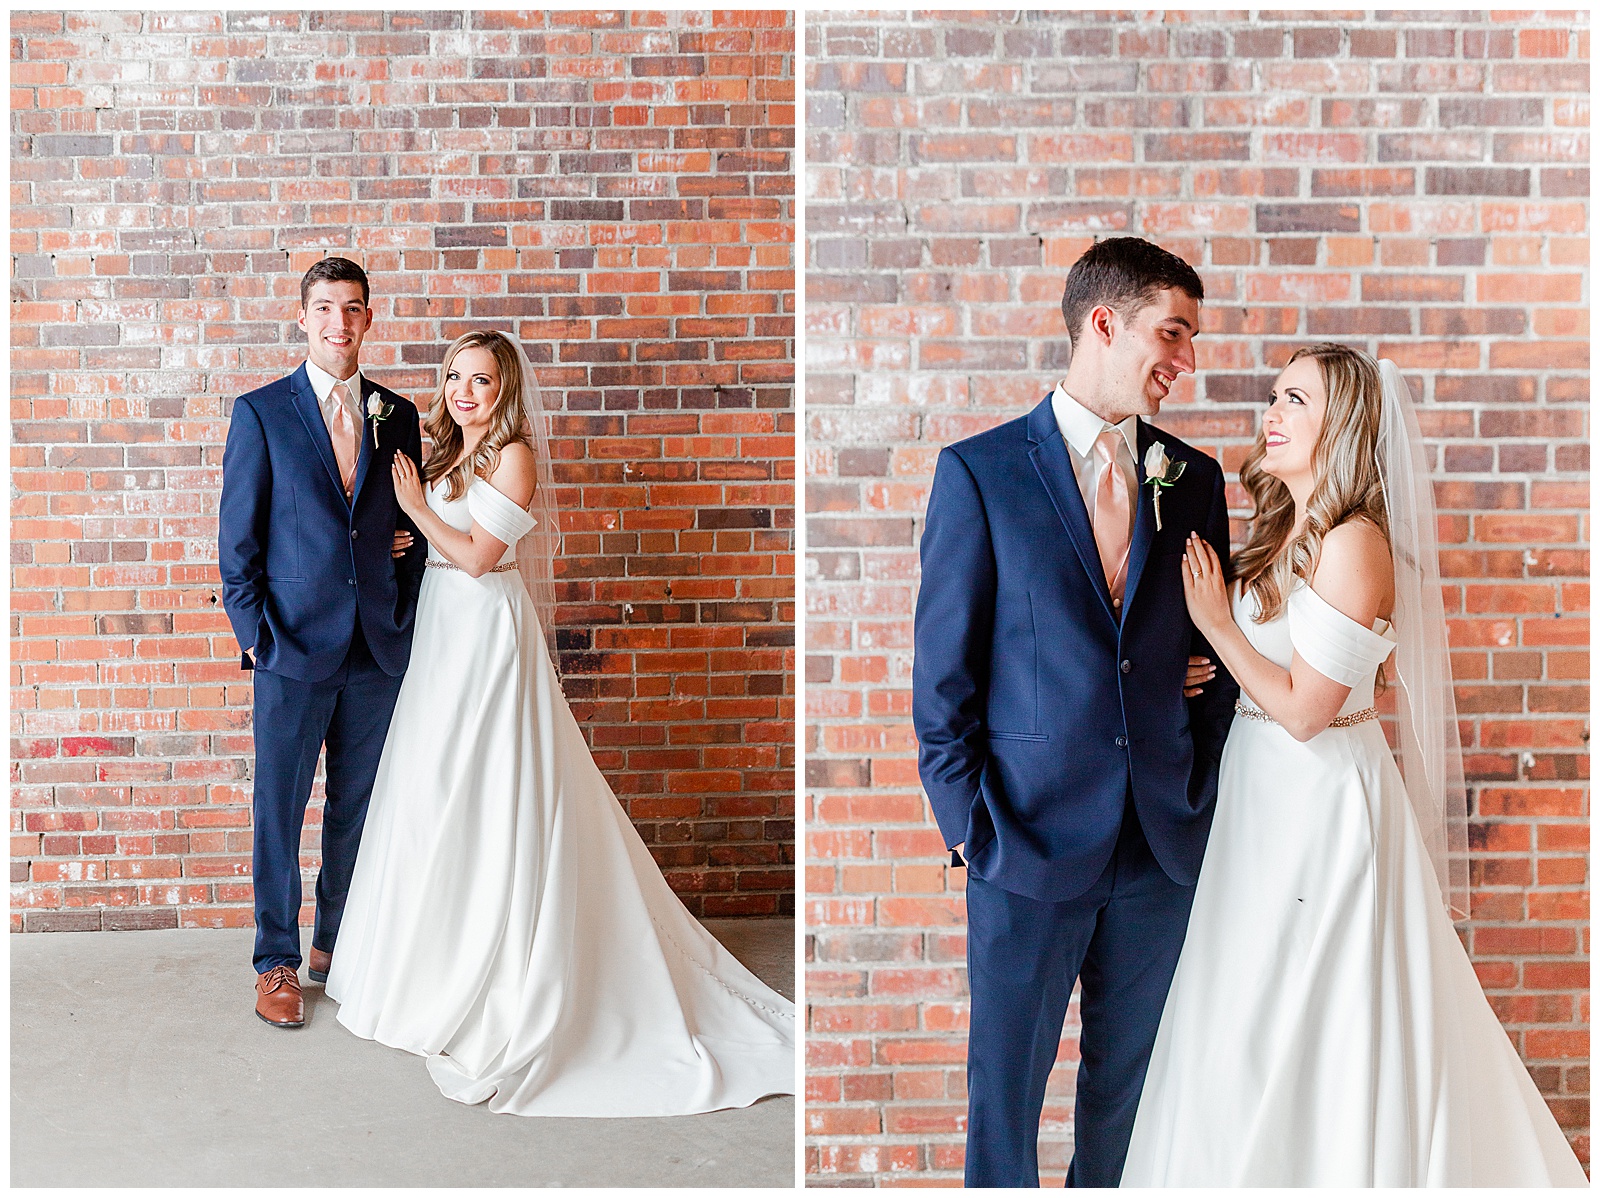 Adorable Bride and Groom Portraits against a red brick wall from Summer Wedding in Charlotte, NC | Check out the full wedding at KevynDixonPhoto.com